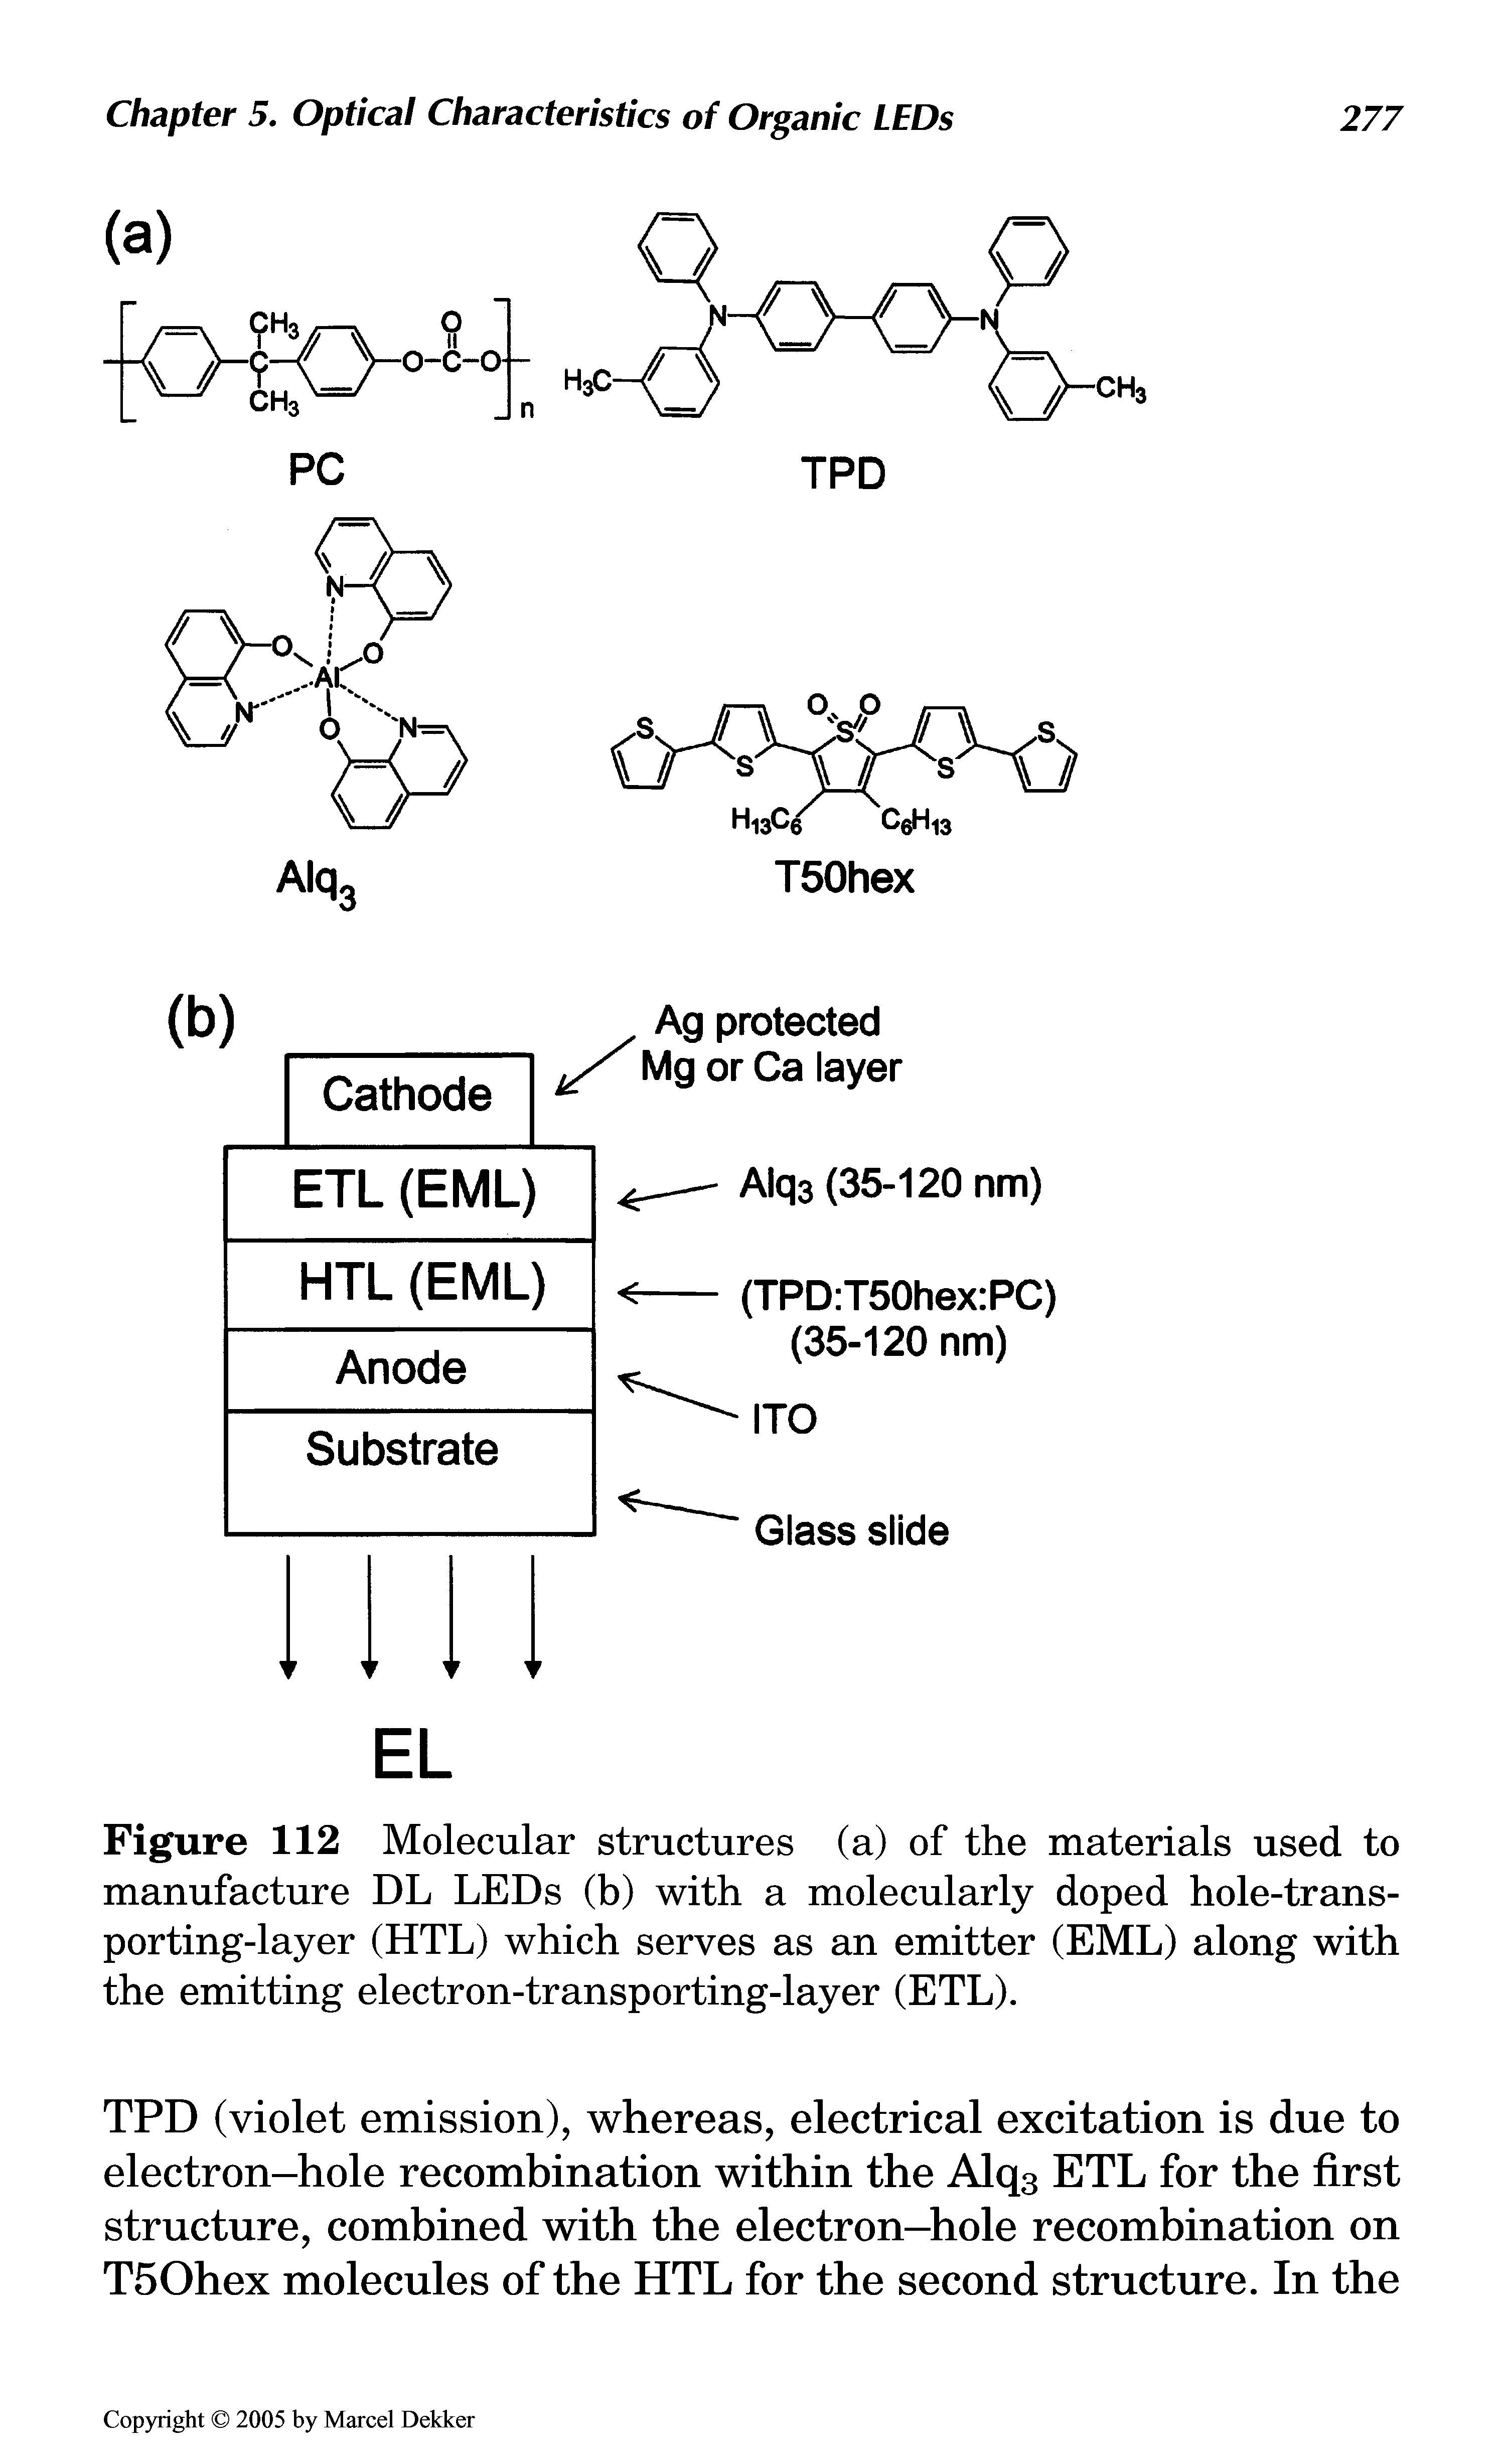 Figure 112 Molecular structures (a) of the materials used to manufacture DL LEDs (b) with a molecularly doped hole-transporting-layer (HTL) which serves as an emitter (EML) along with the emitting electron-transporting-layer (ETL).